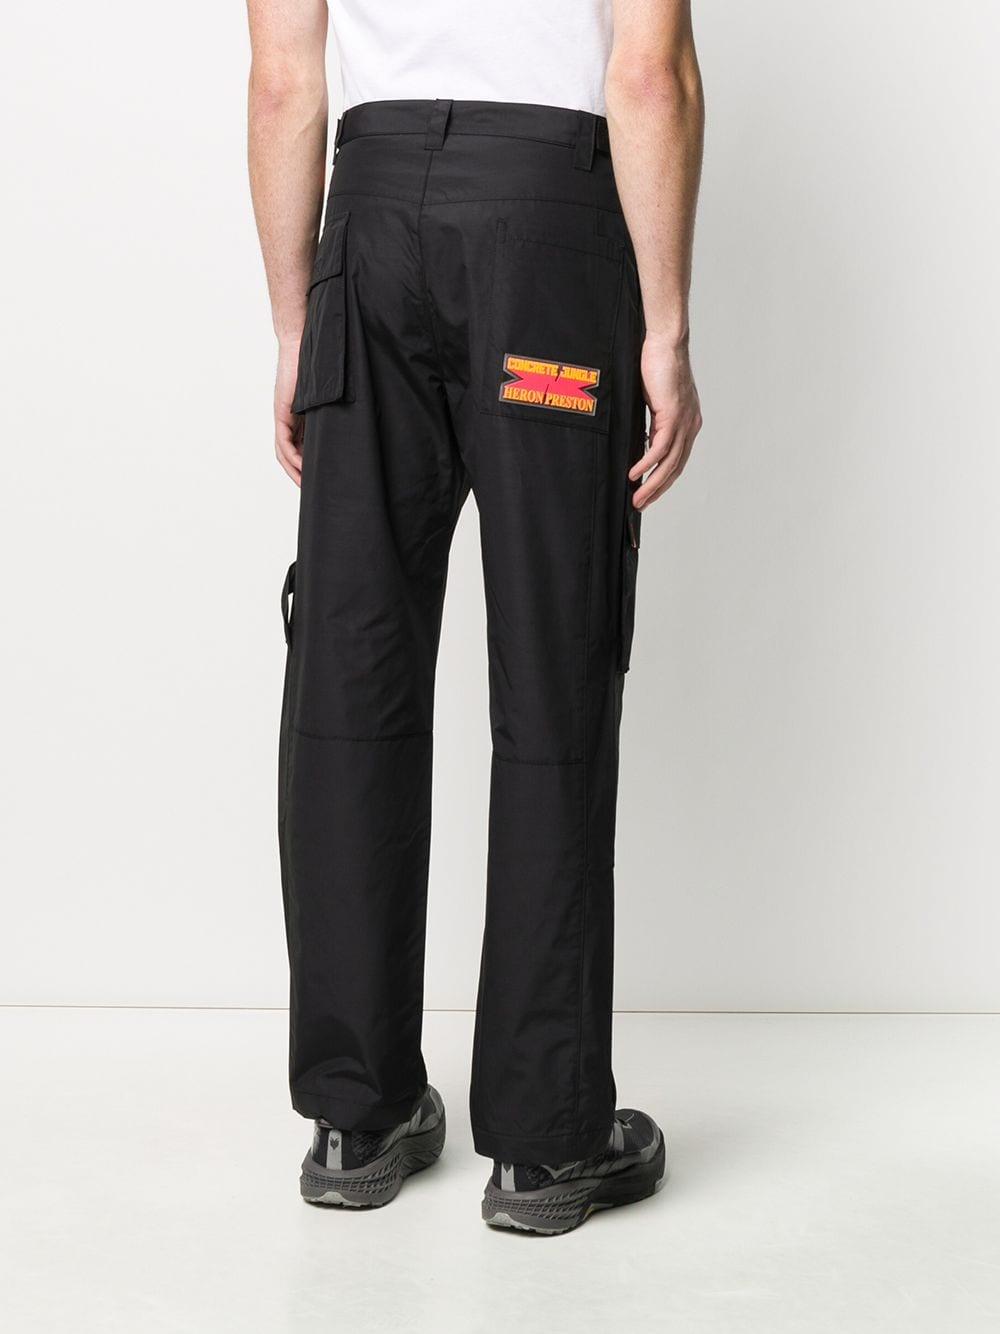 Heron Preston Cotton Loose-fit Cargo Trousers in Black for Men - Lyst